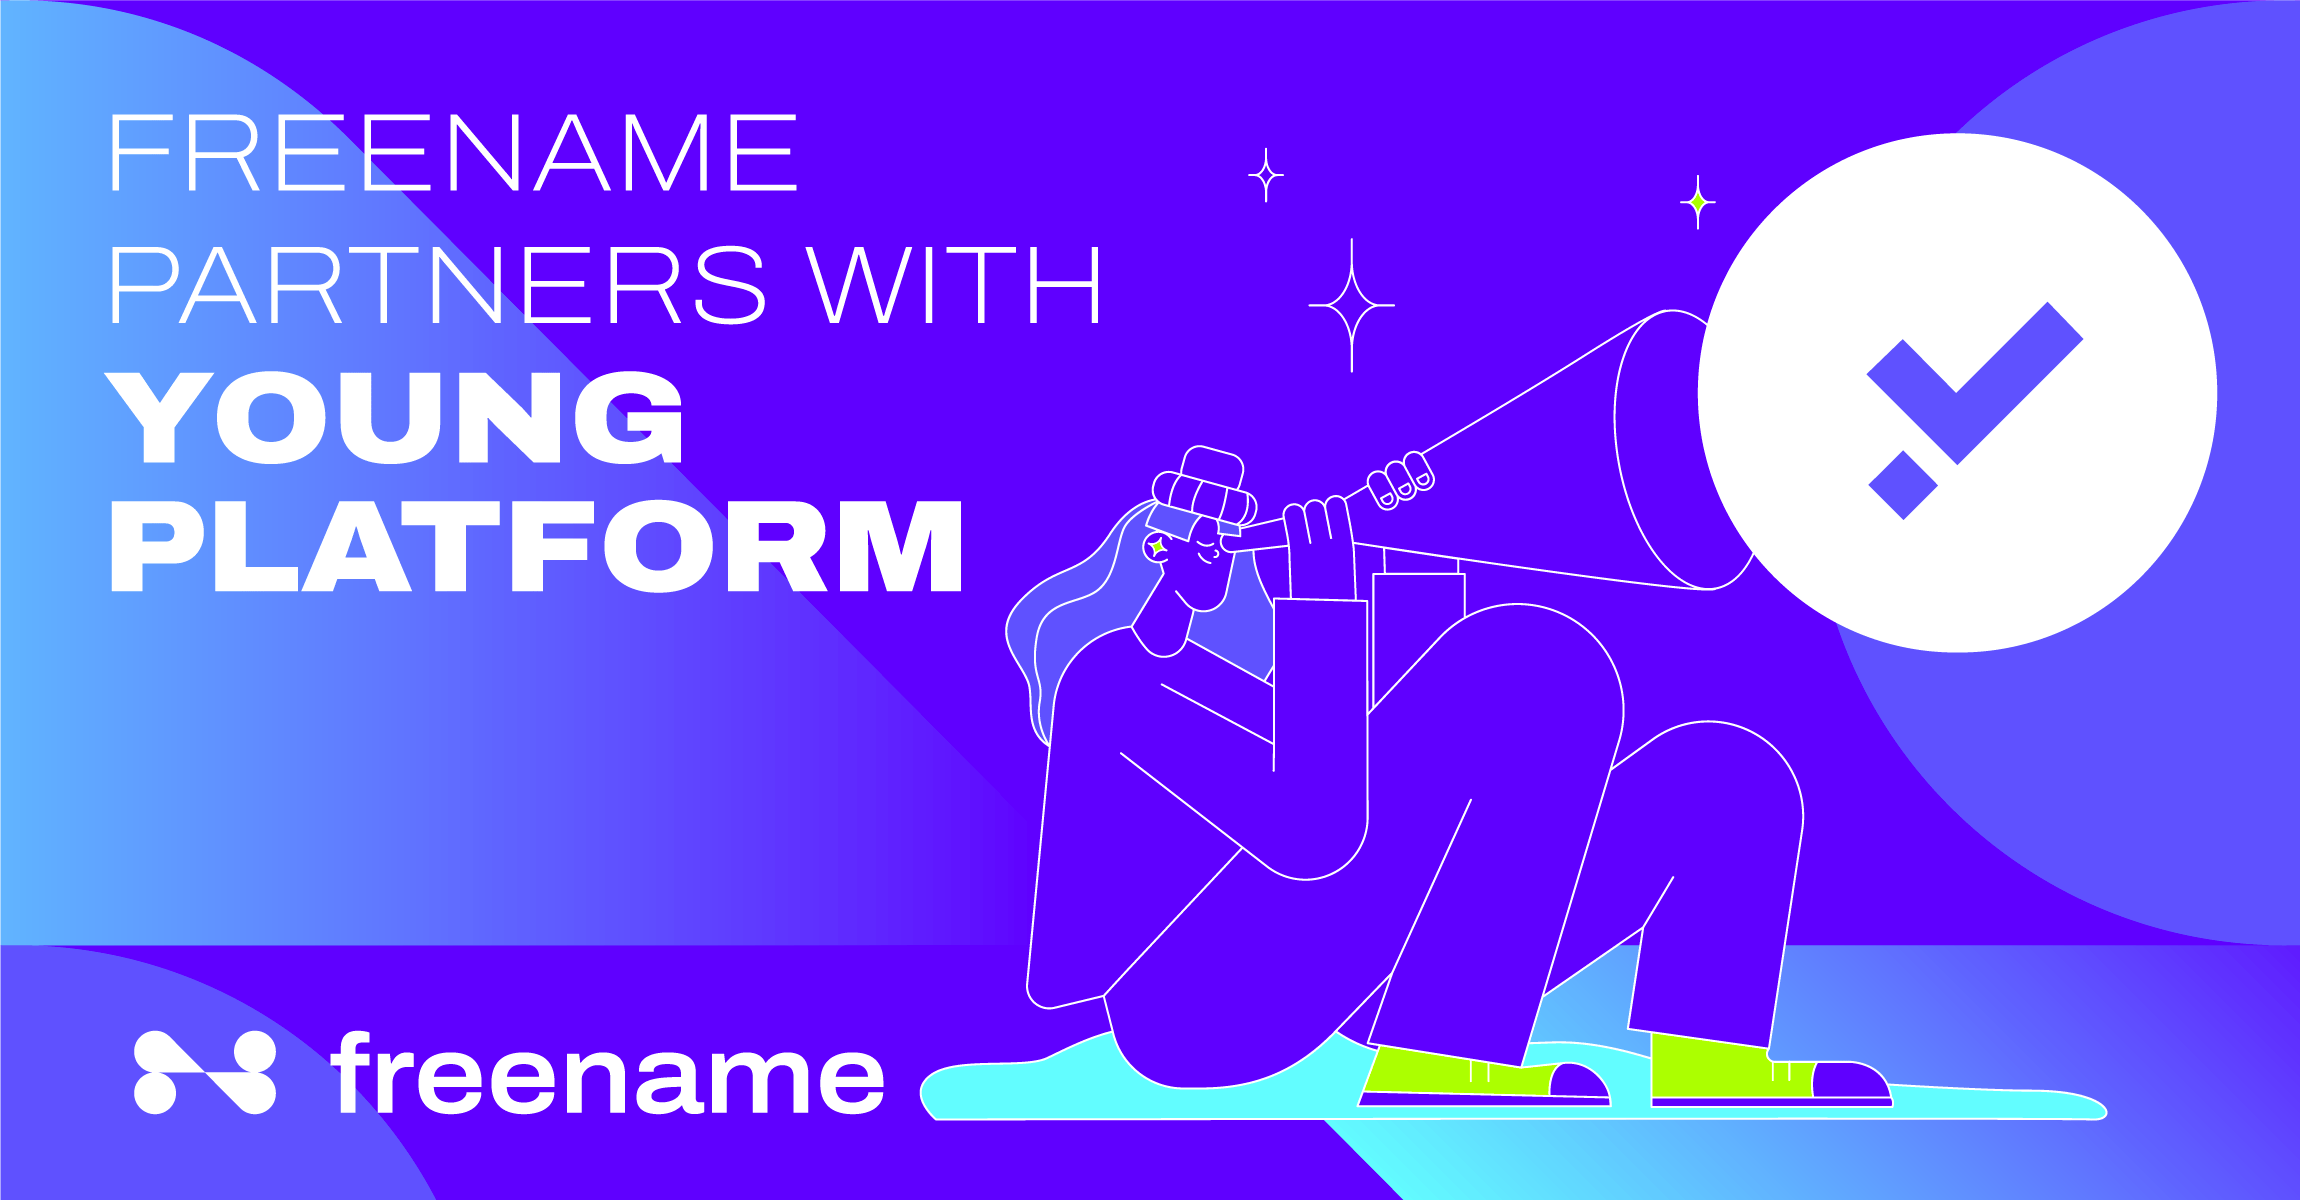 Freename Partners with Young Platform blog